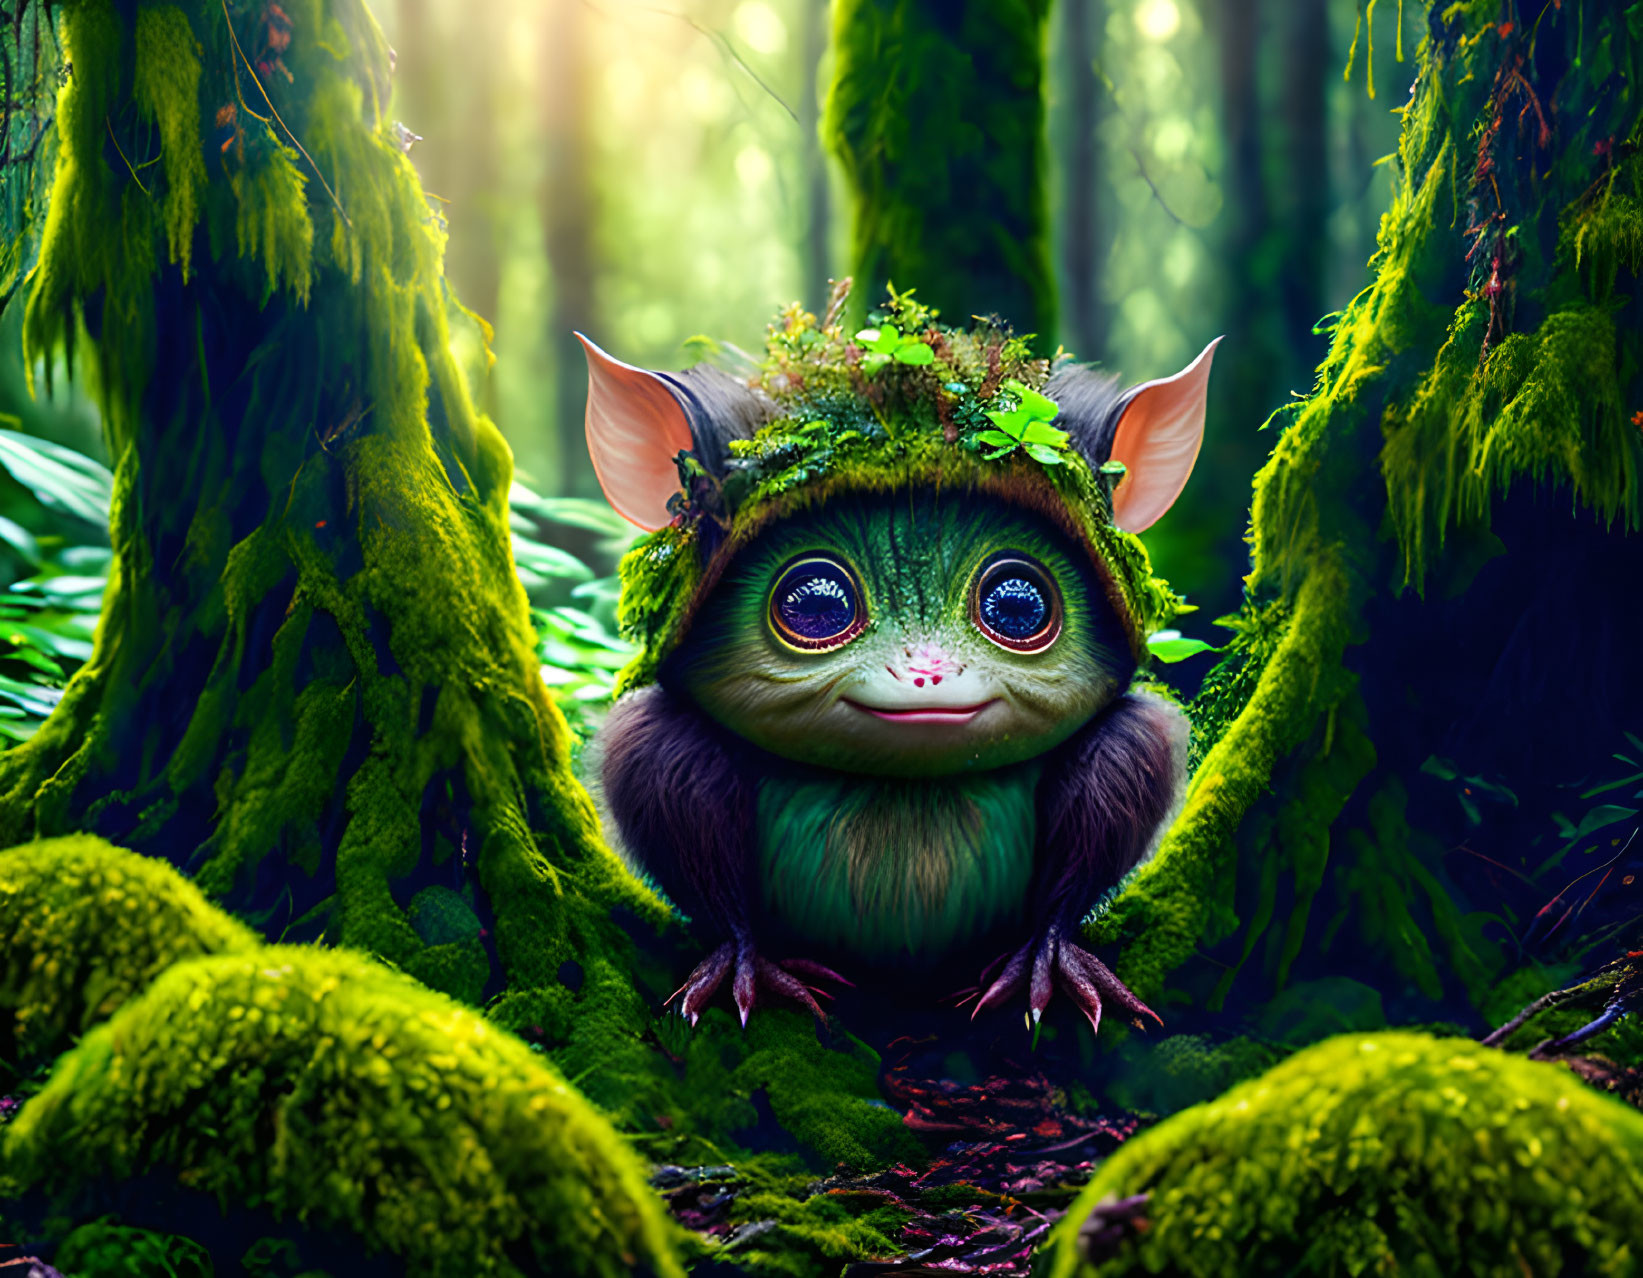 Enchanted creature with large ears and eyes in mossy forest